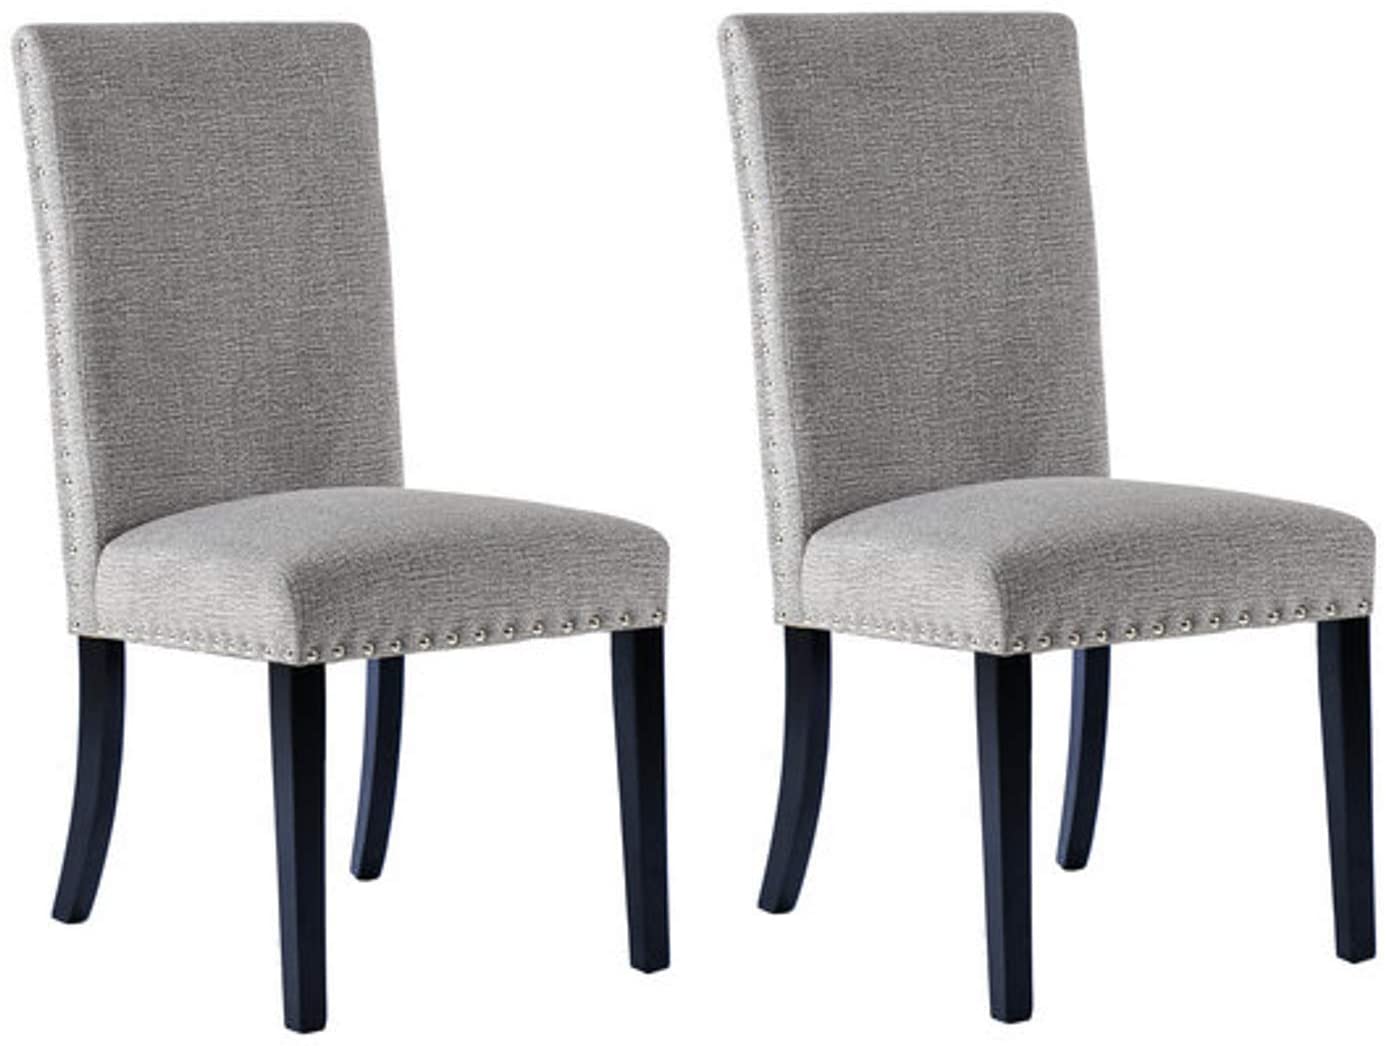 Cui Liu Owen Upholstered Dining Chair in Grey Linen with Black Wooden Leg and Shiny Silver Nailhead (Set of 2)